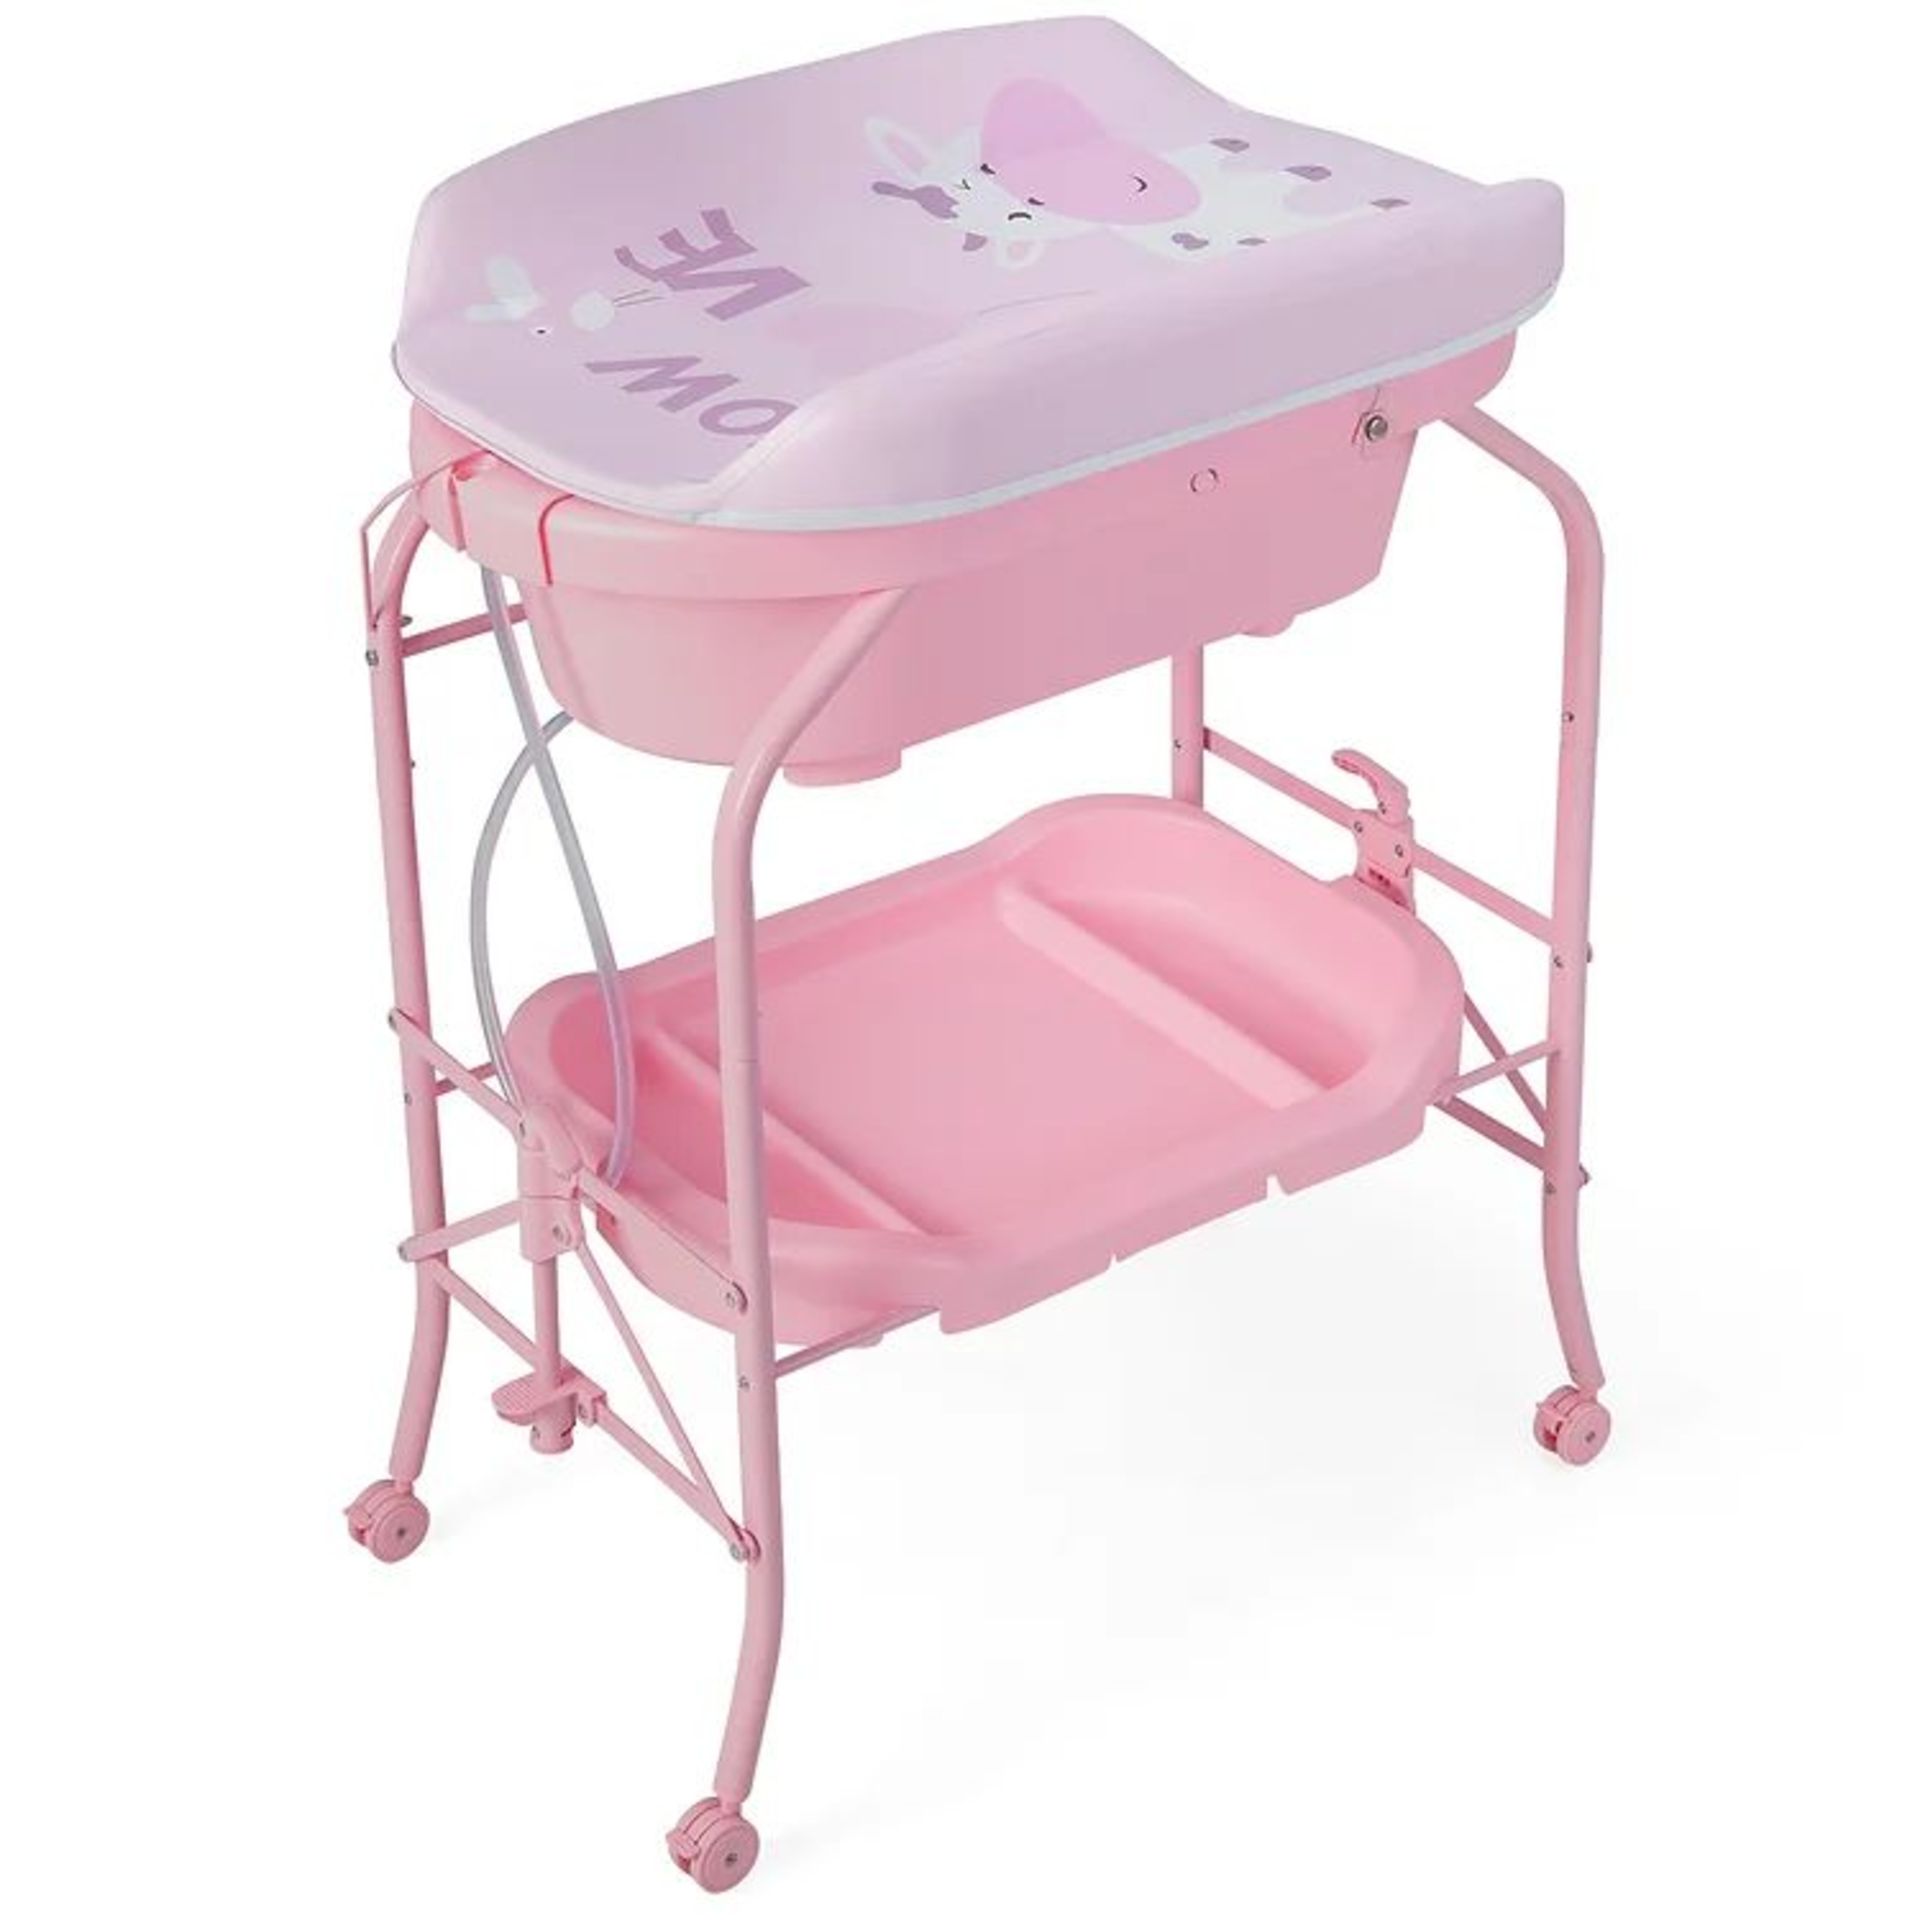 2-In-1 Baby Change Table with Bathtub and Folding Changing Station-Pink. - ER53. With a practical